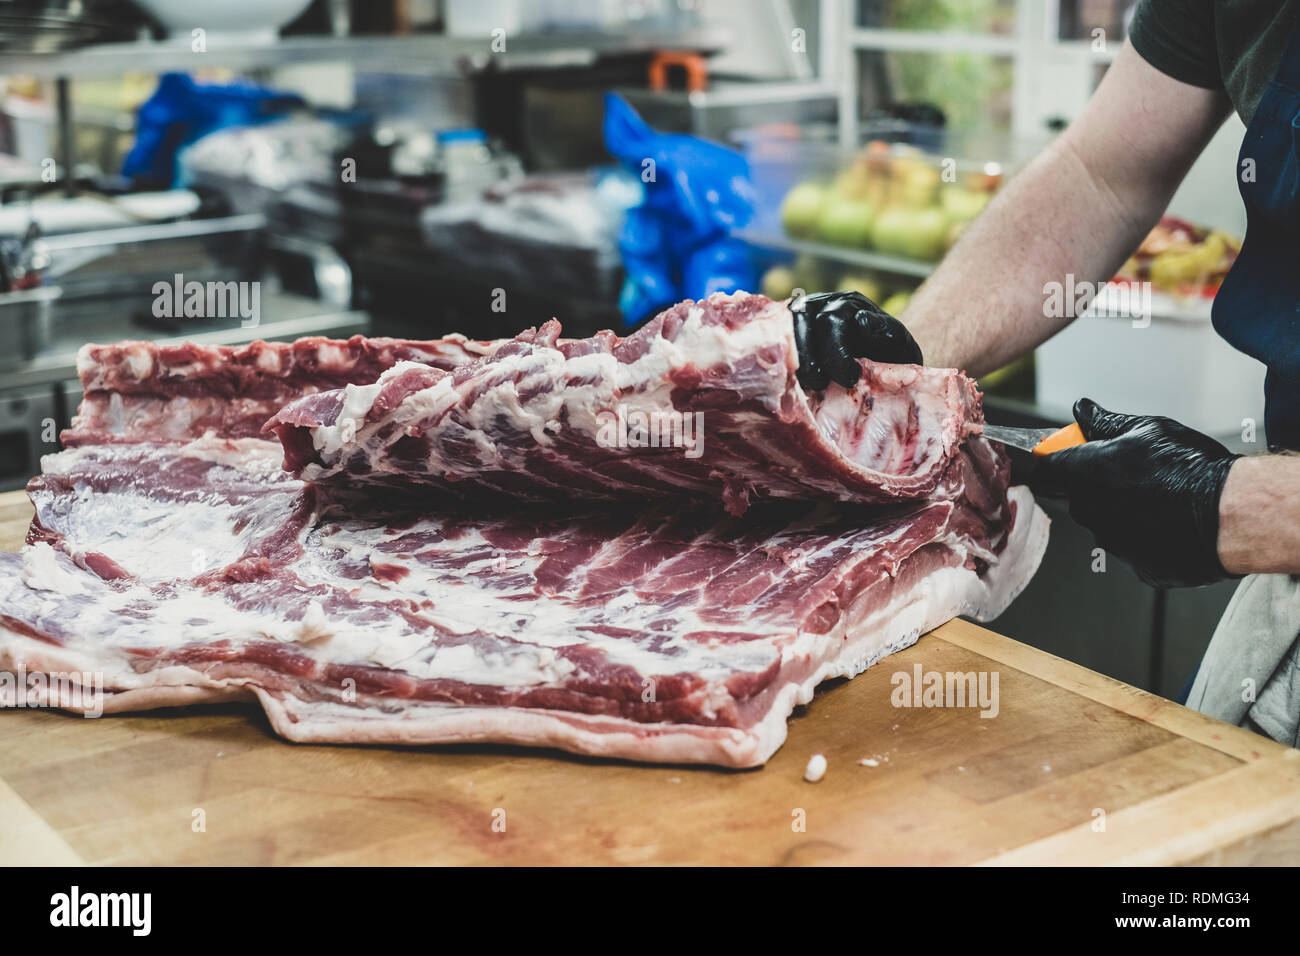 Close up of butcher wearing black rubber gloves cutting pork ribs on butcher's block. Stock Photo